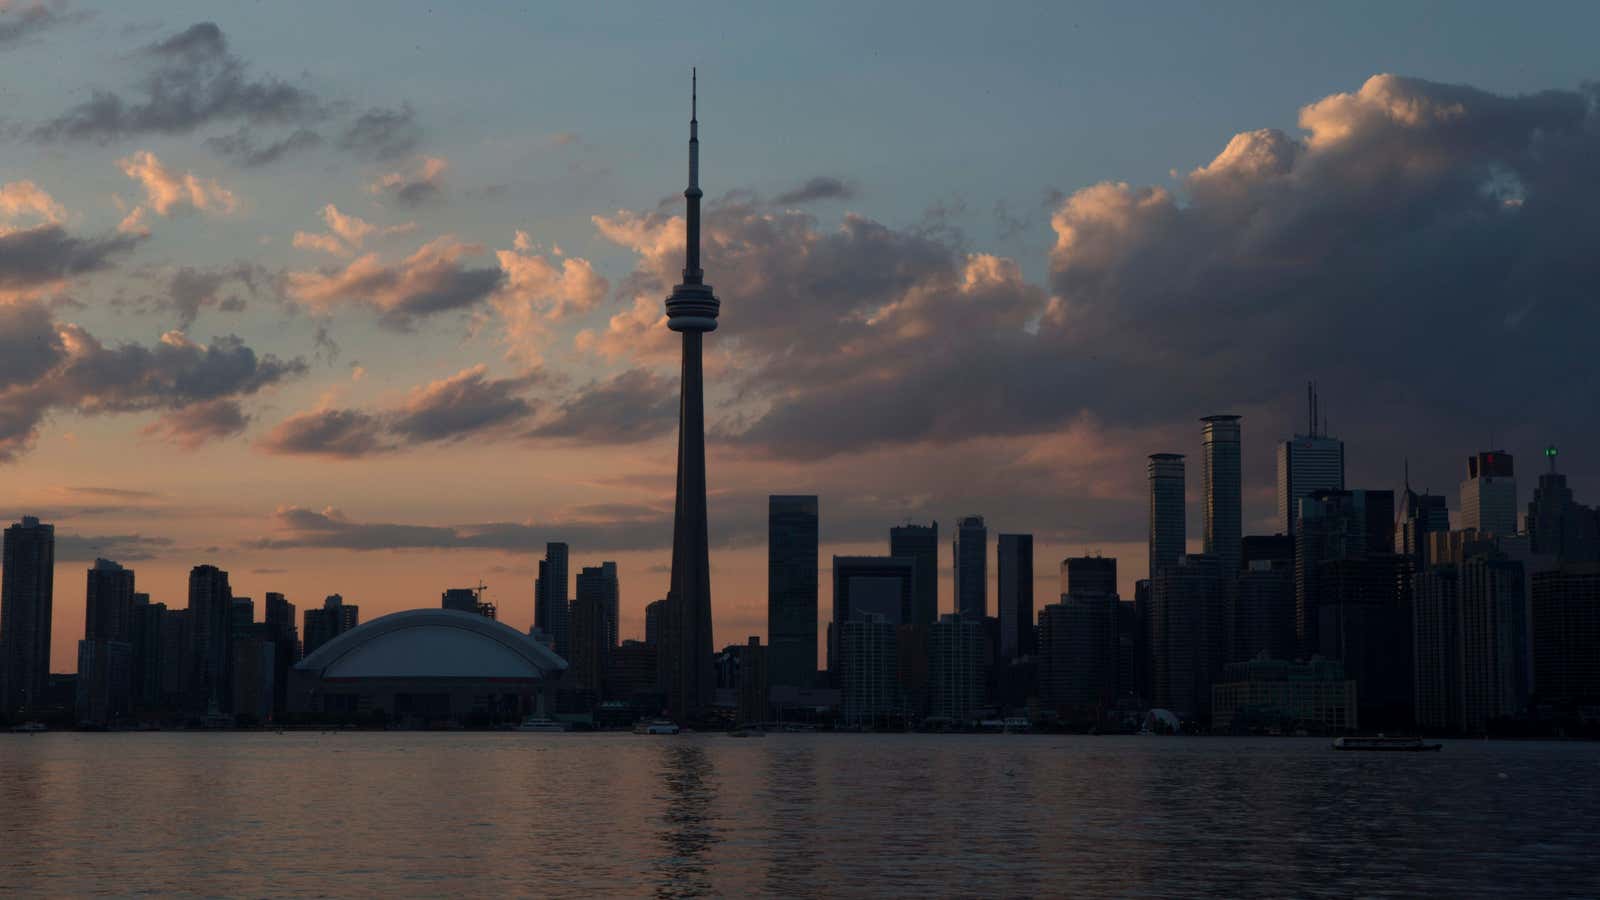 Toronto is one of Canada’s most walkable cities.